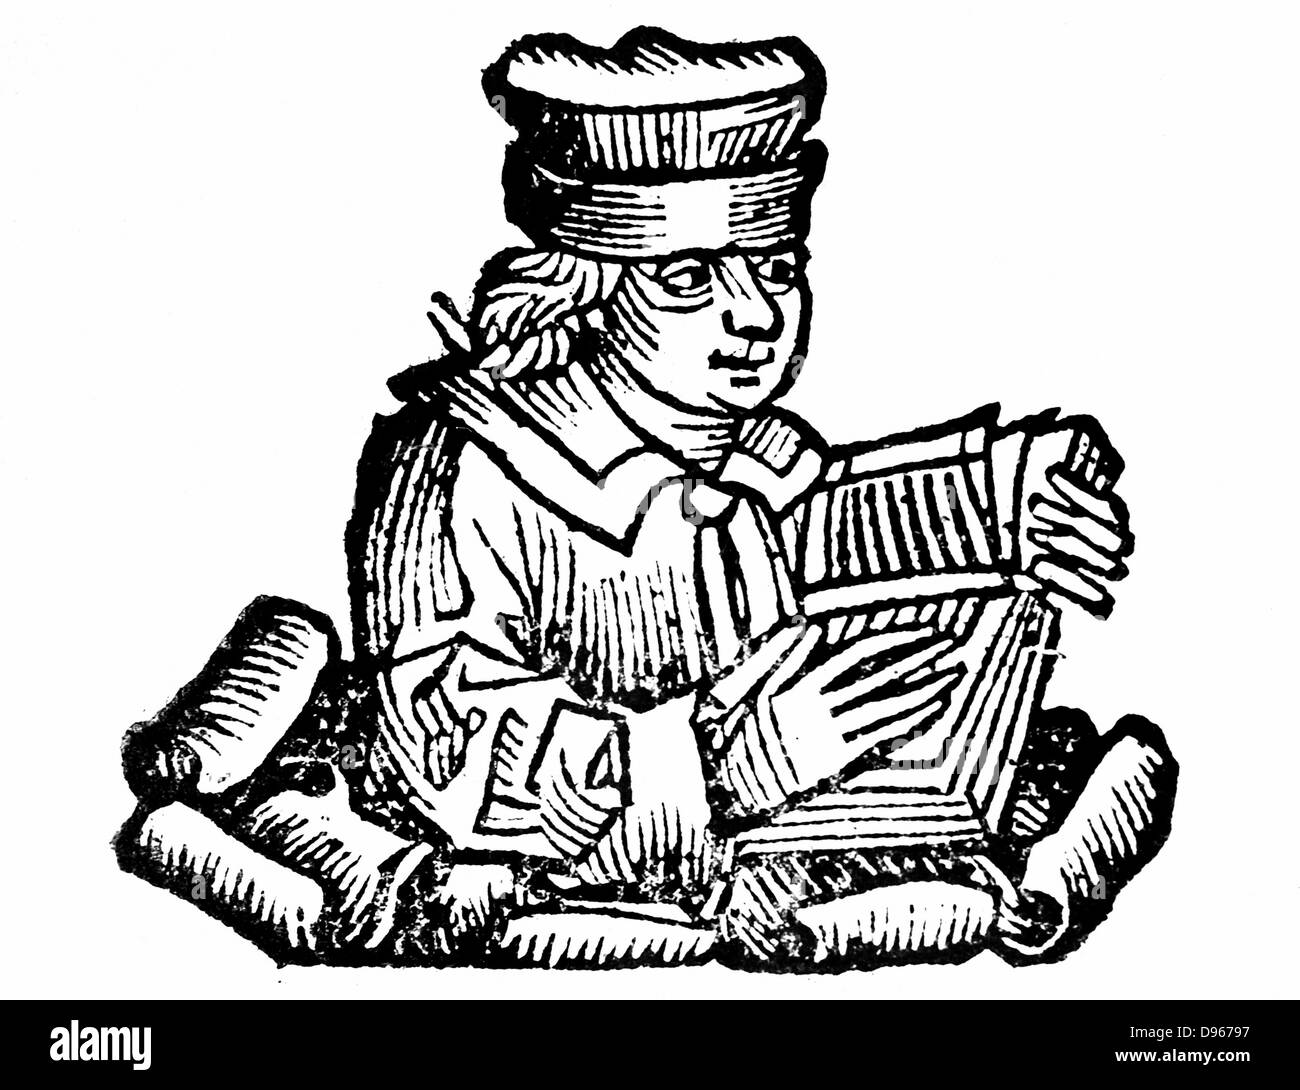 Aesop - probably legendary Greek fabulist. According to Herodotus, he lived in the 6th century BC. Woodcut from Hartmann Schedel 'Liber chronicarum mundi' (Nuremberg Chronicle) Nuremberg 1493 Stock Photo